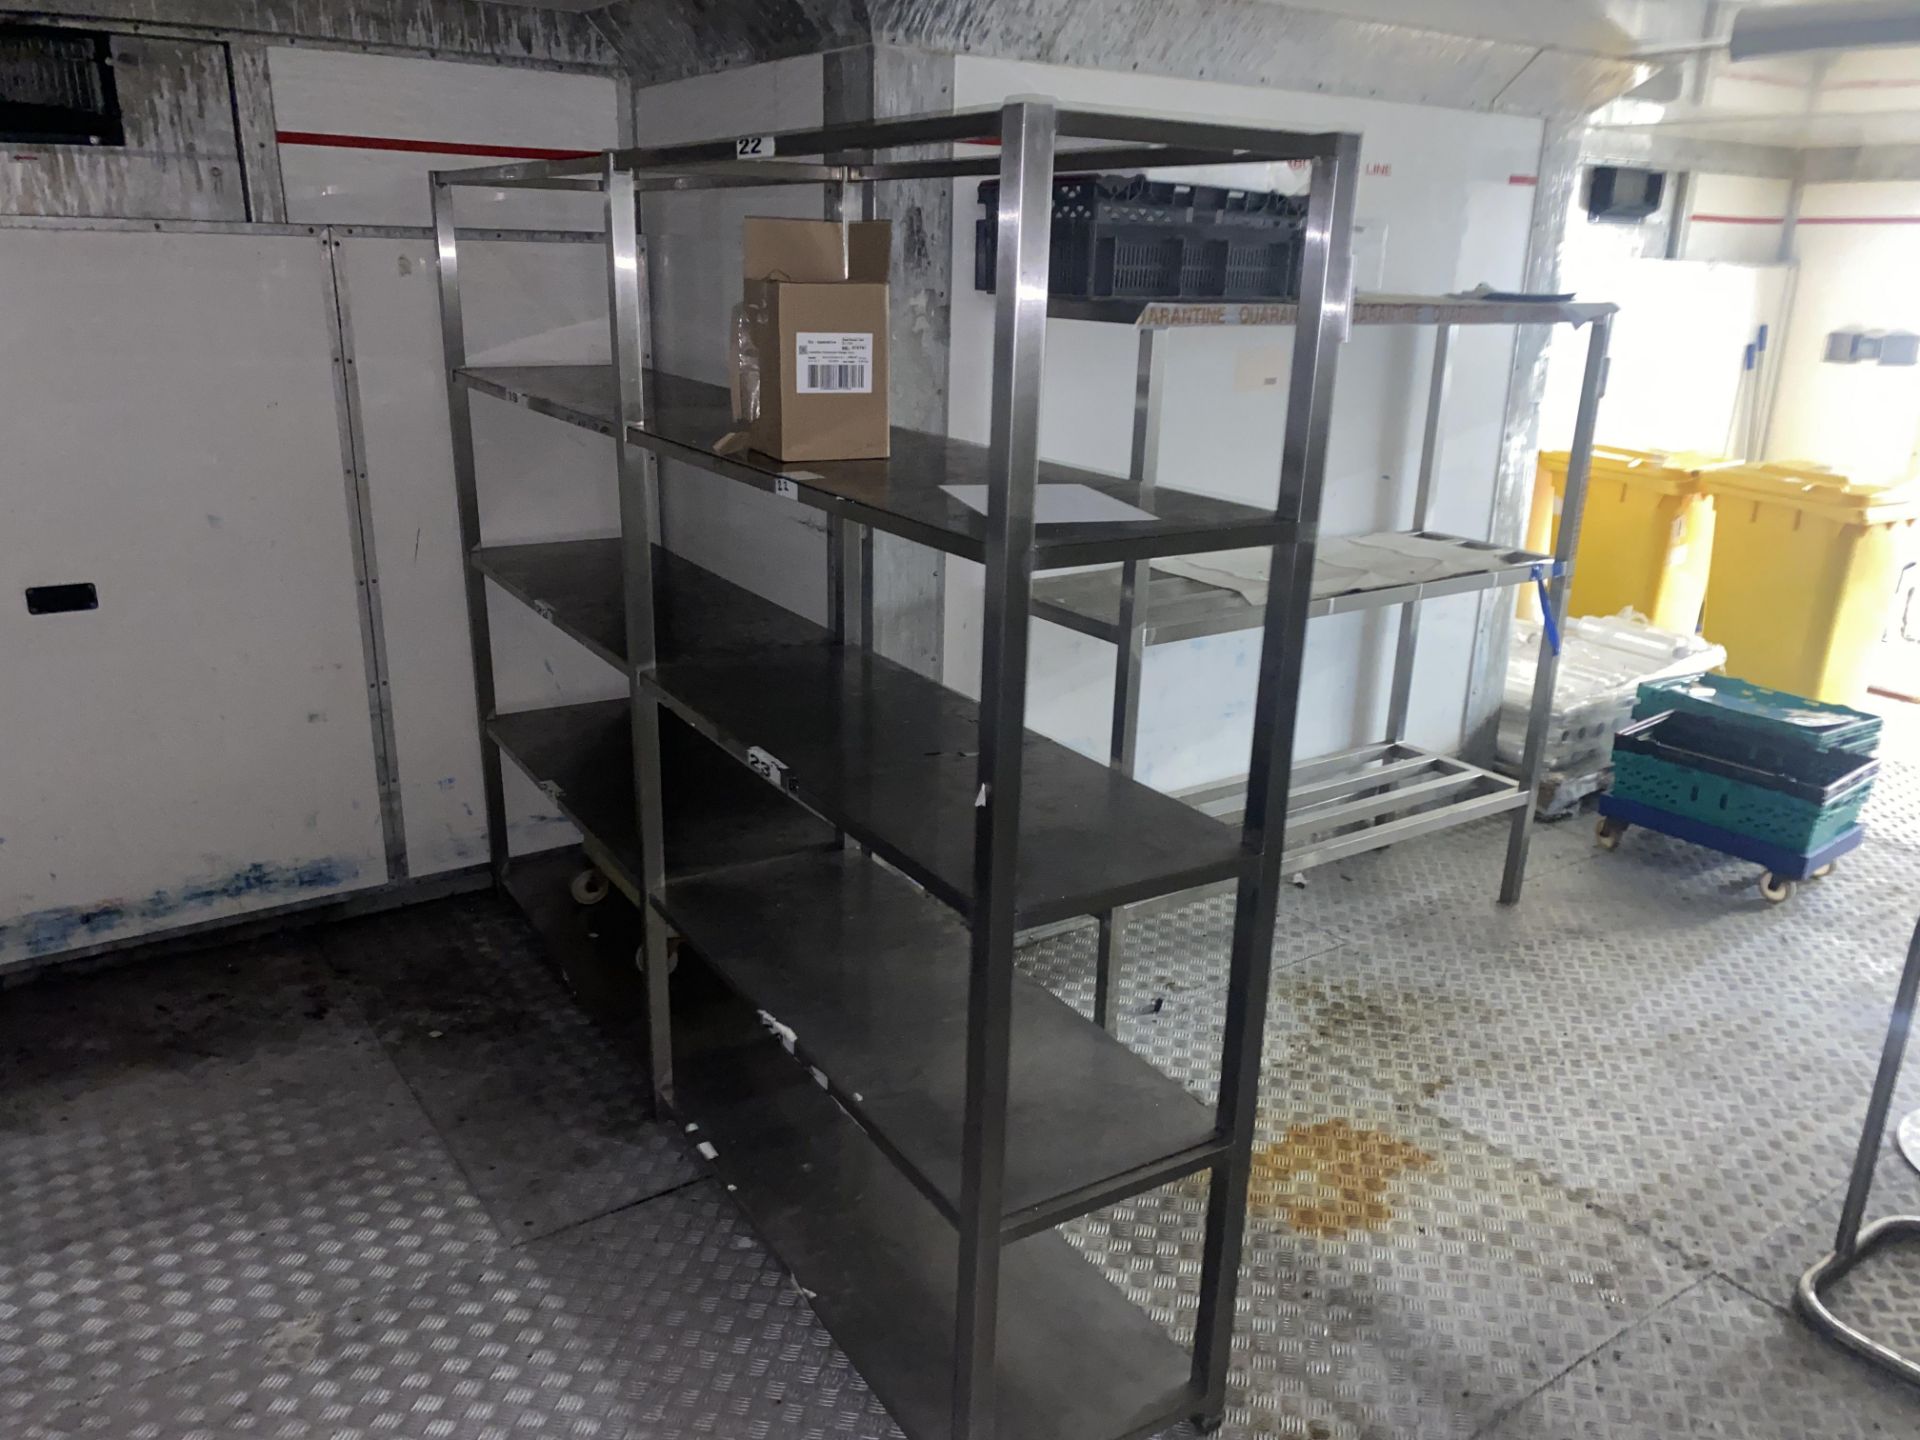 3 Bays of stainless steel racking